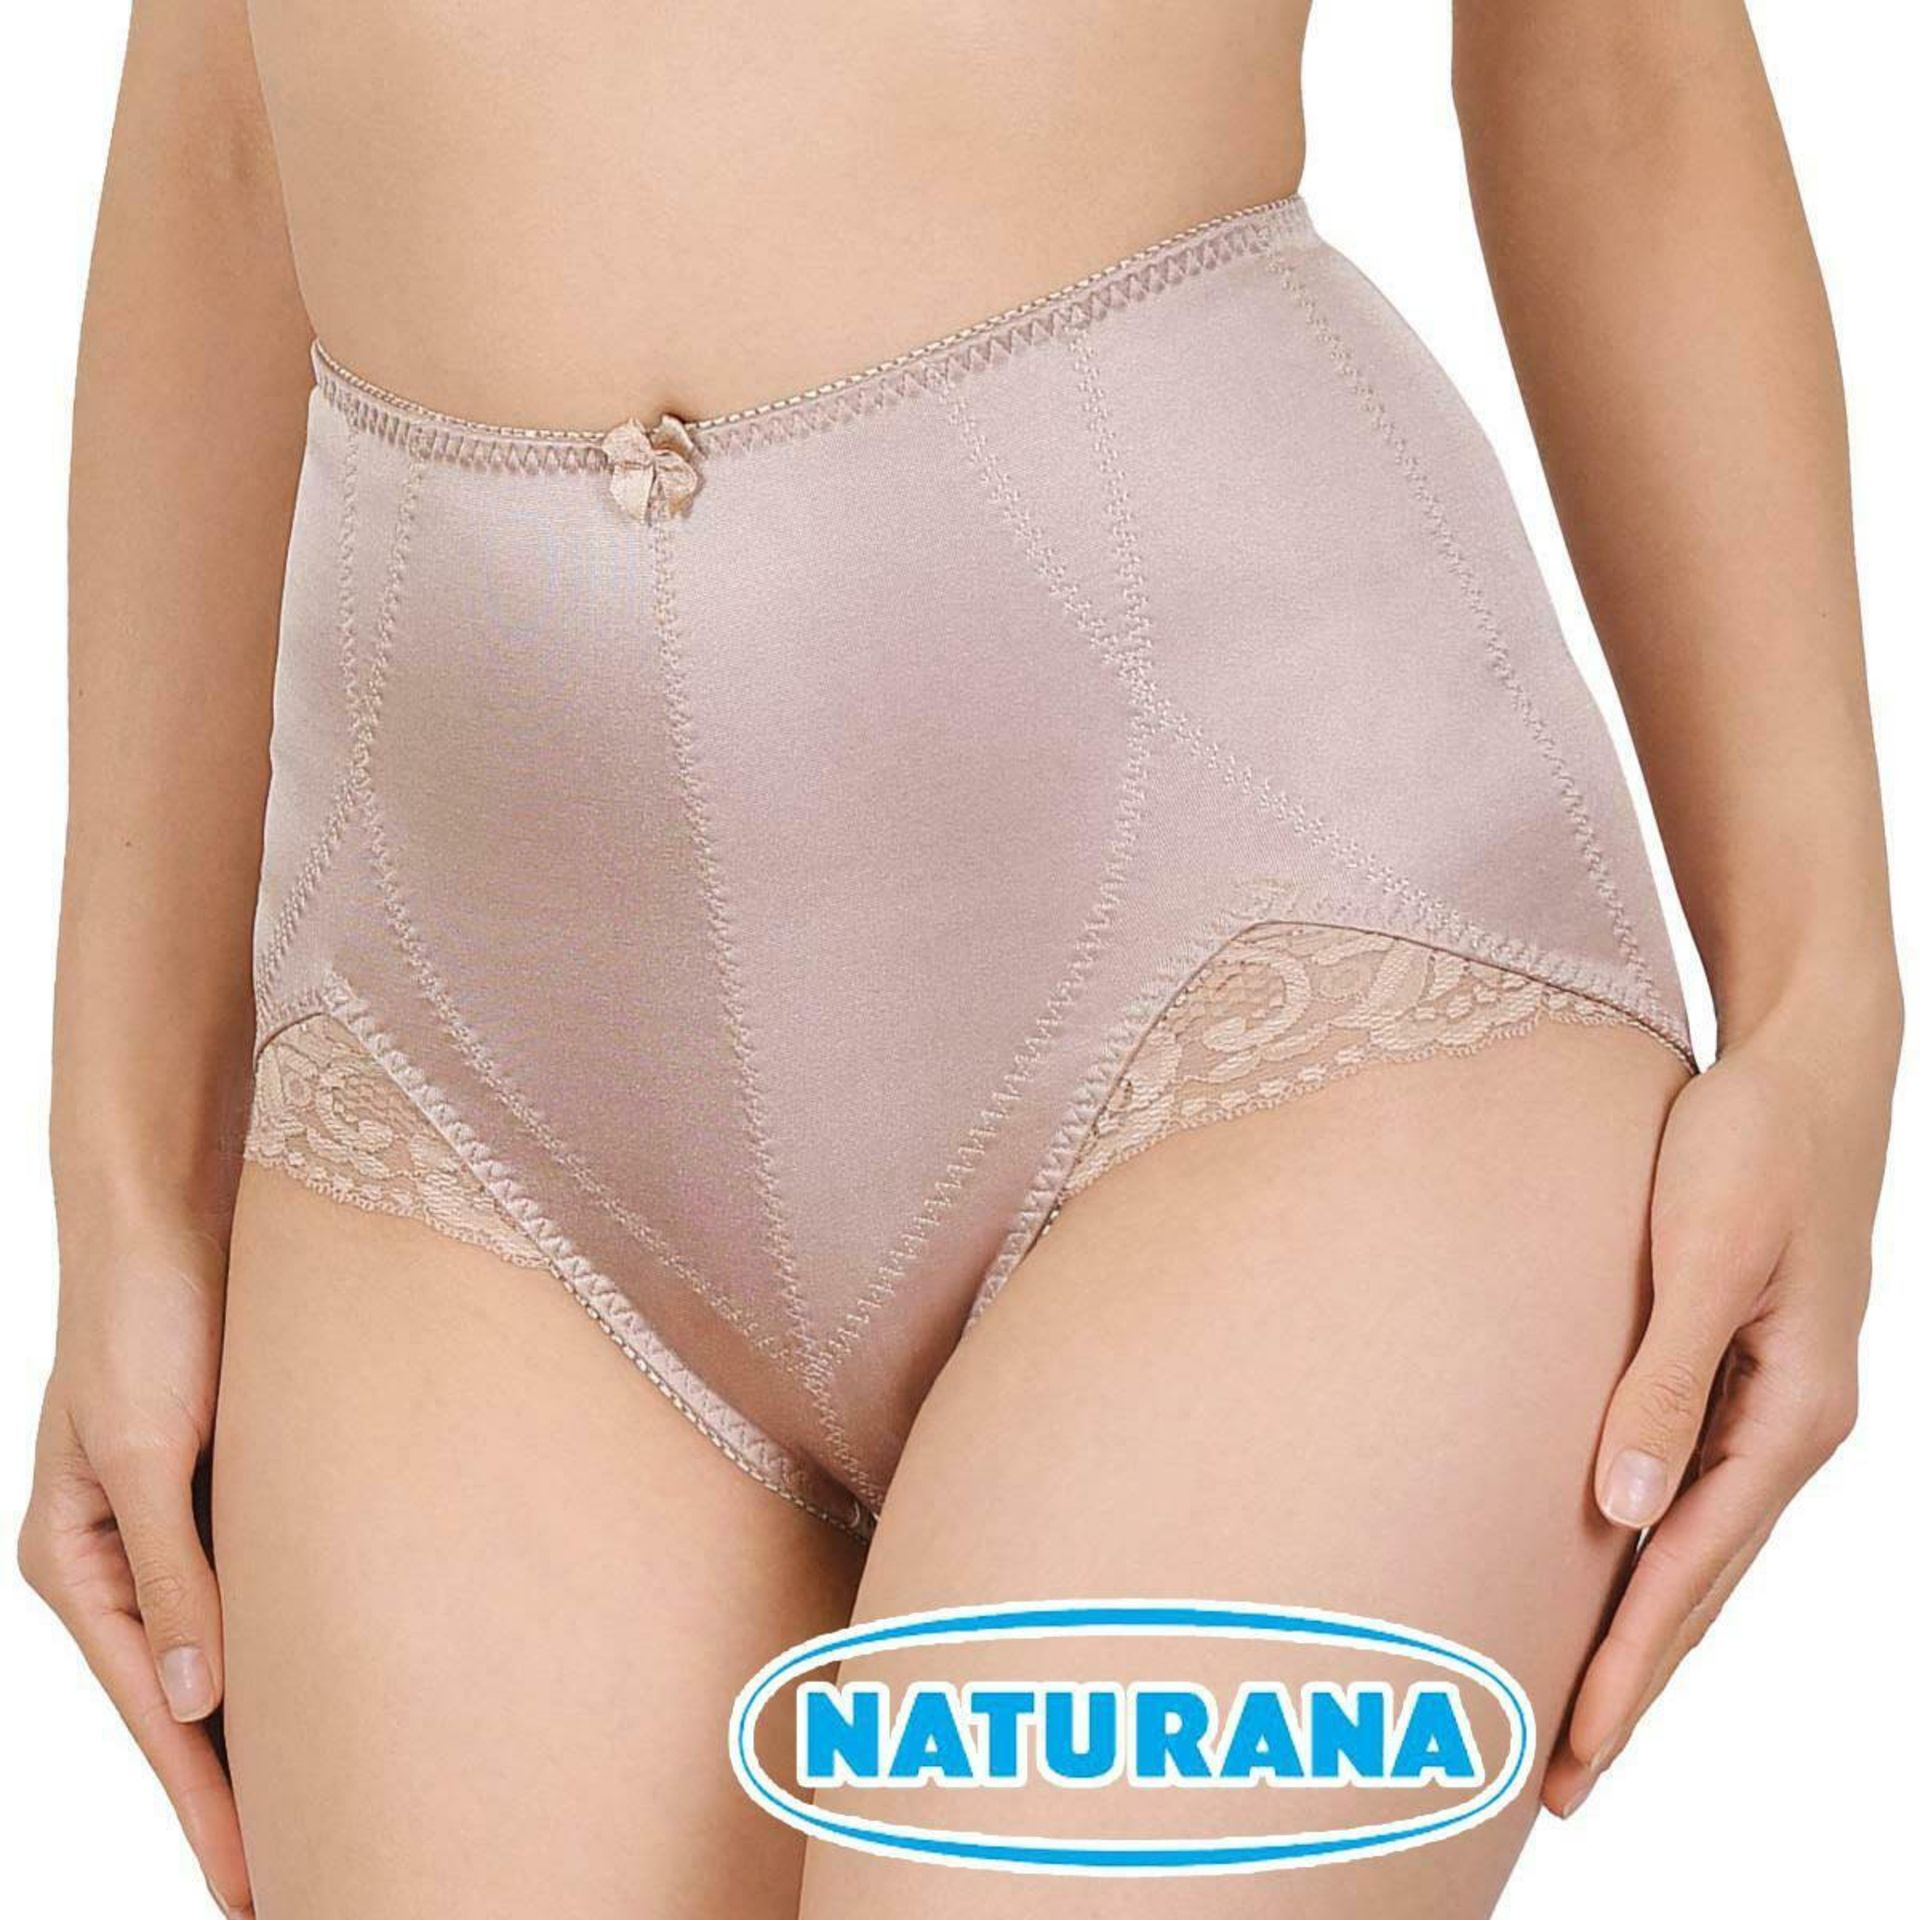 20 X BRAND NEW NATURANA GIRDLES IN VARIOUS SIZES R15